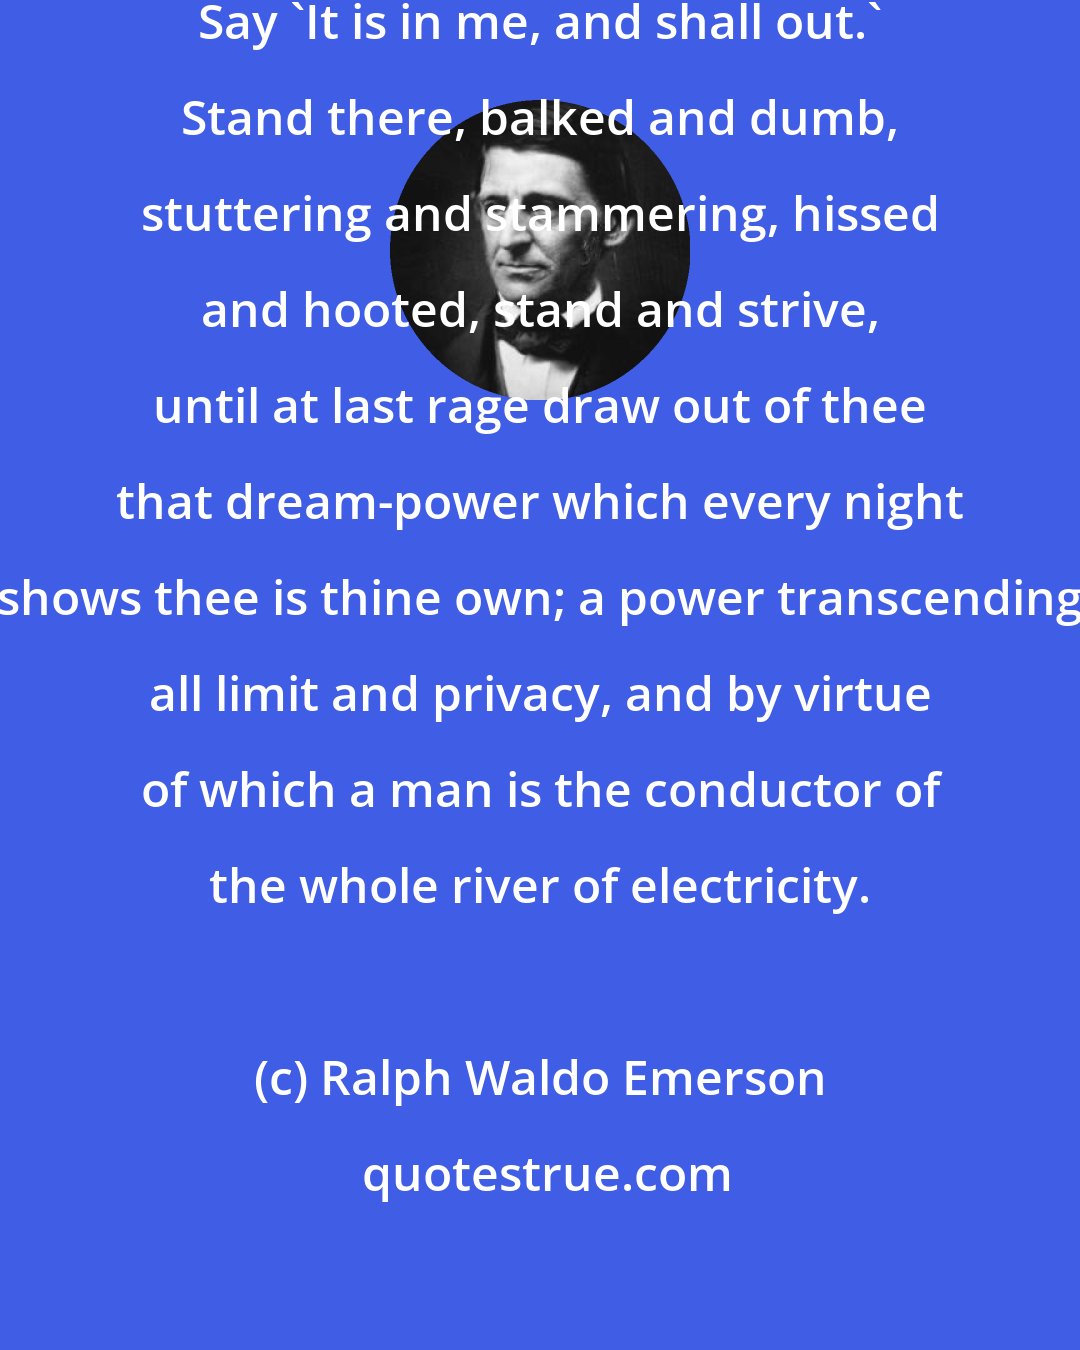 Ralph Waldo Emerson: Doubt not, O poet, but persist. Say 'It is in me, and shall out.' Stand there, balked and dumb, stuttering and stammering, hissed and hooted, stand and strive, until at last rage draw out of thee that dream-power which every night shows thee is thine own; a power transcending all limit and privacy, and by virtue of which a man is the conductor of the whole river of electricity.